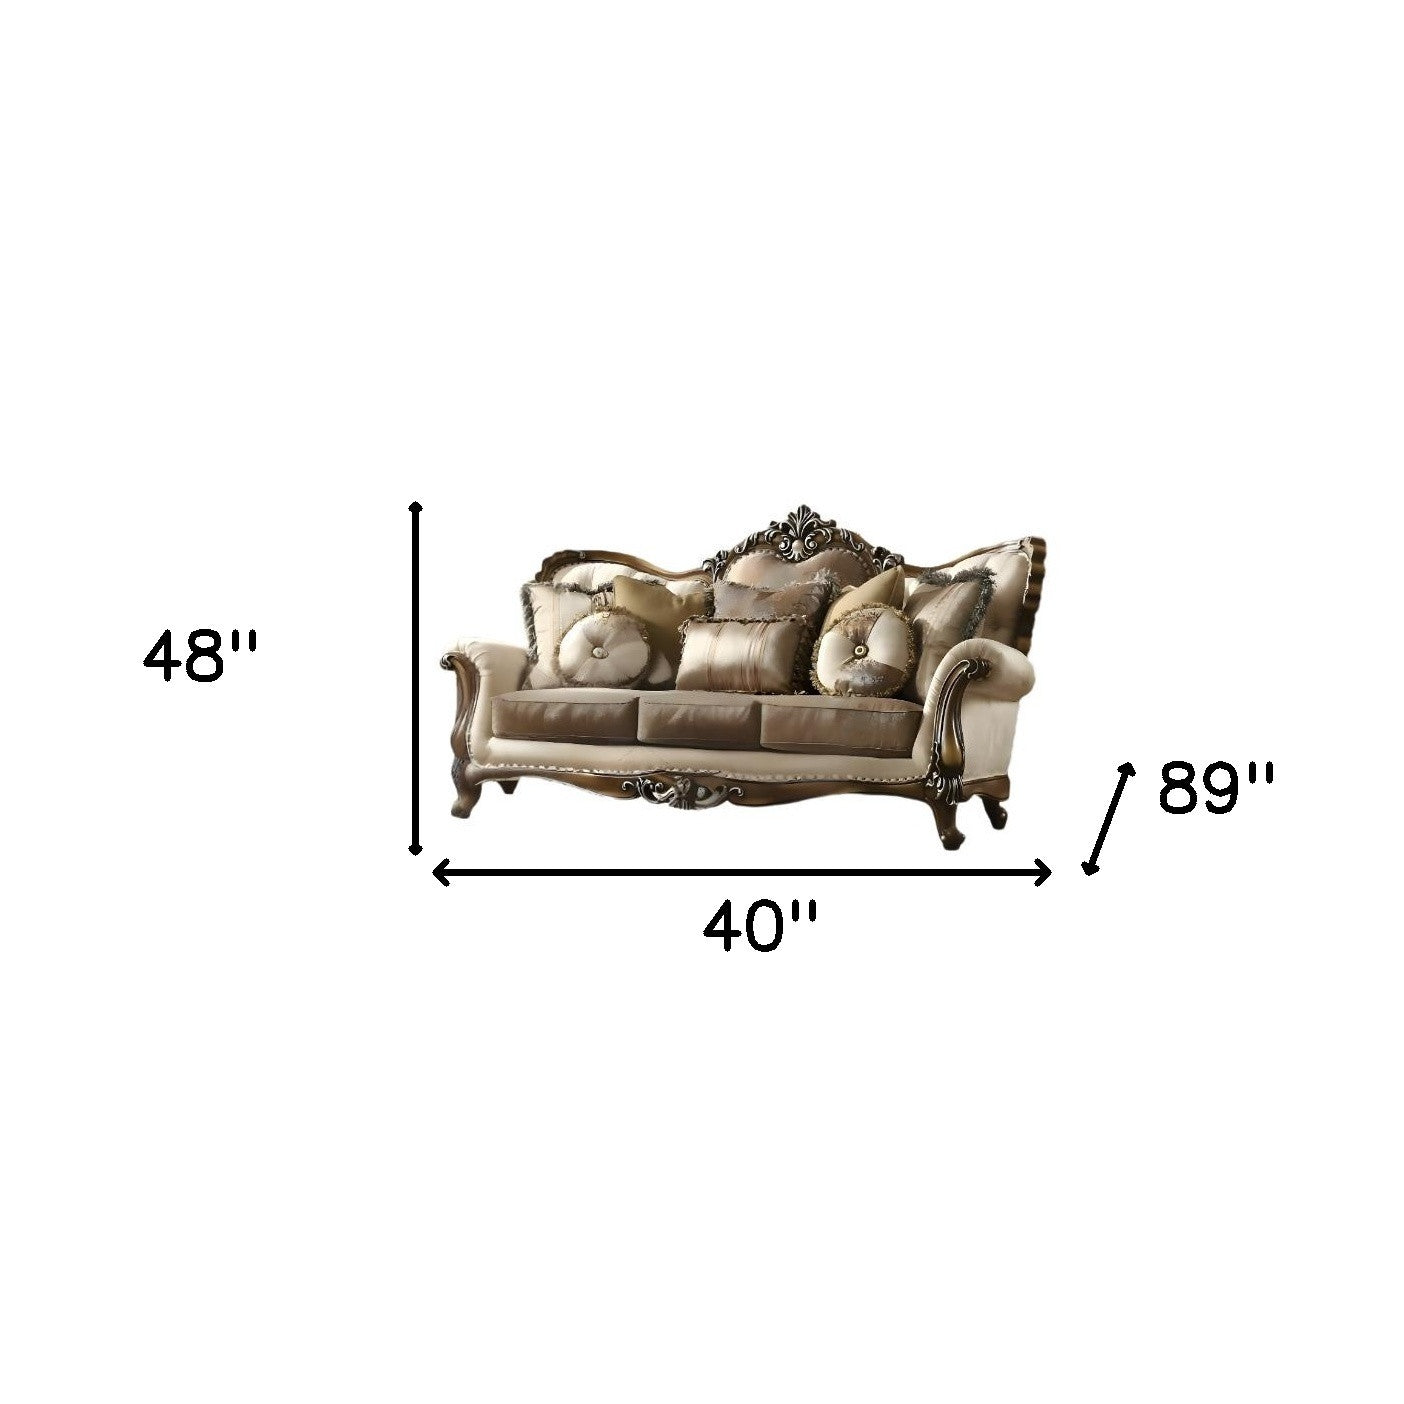 40" Tan Polyester Blend Curved Floral Sofa And Toss Pillows With Champagne Legs